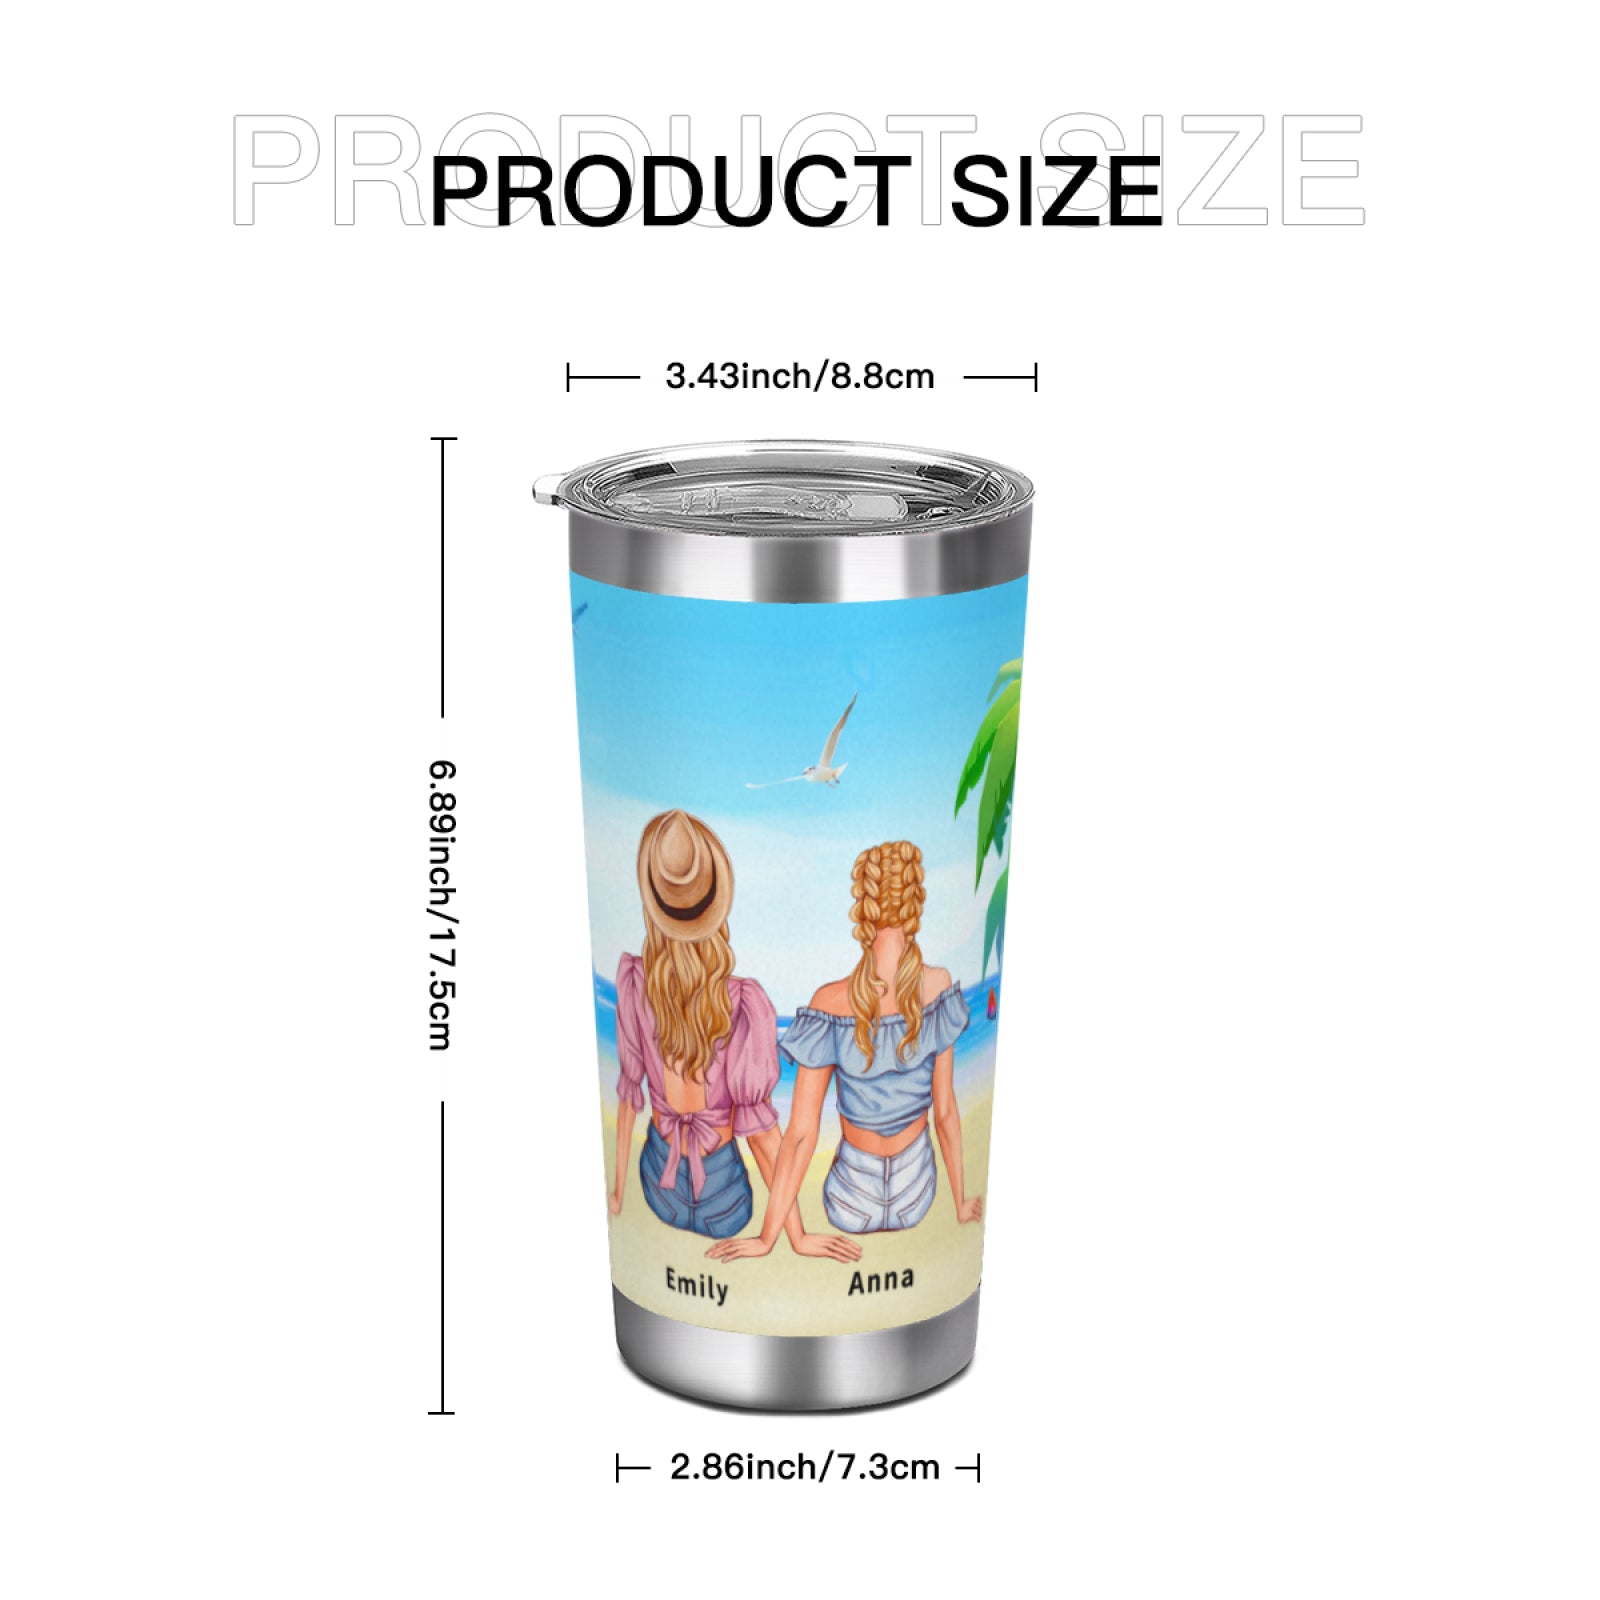 Personalized Tumbler-‘life is better with Besties’,Gifts For Sister,Gifts For Friends - colorfulcustom